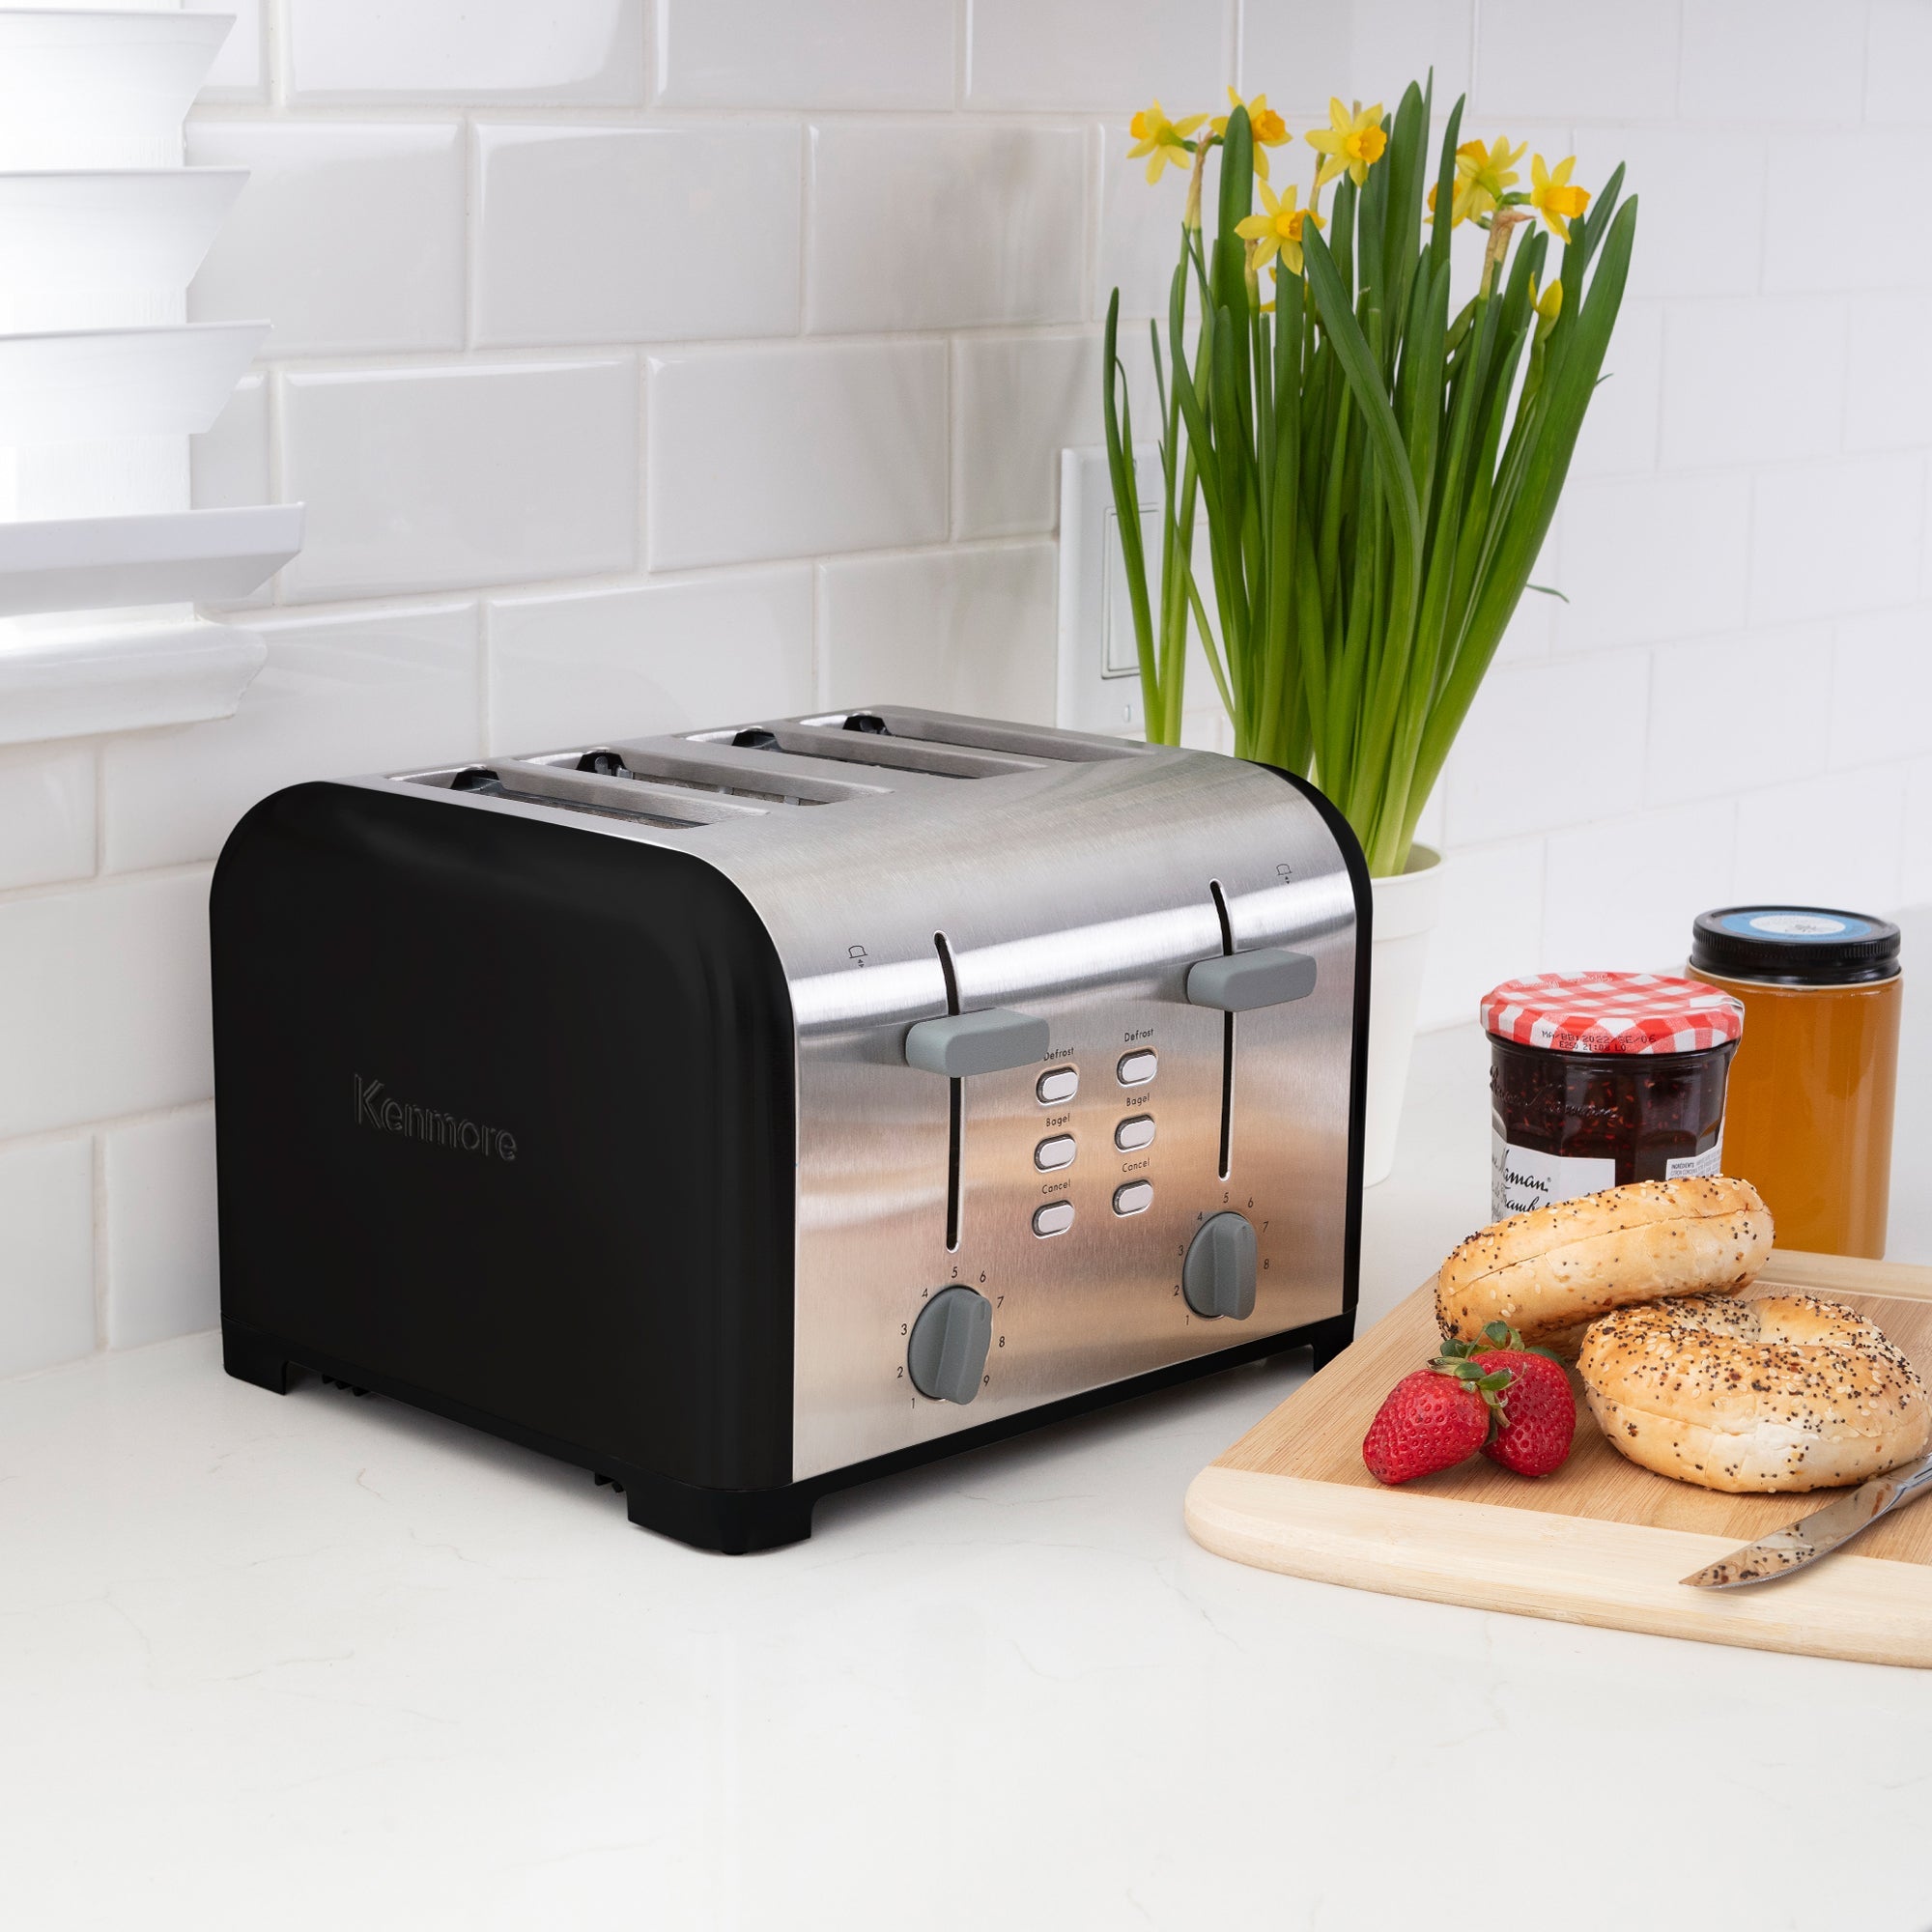 Kenmore 4-Slice Toaster, Black Stainless Steel, Dual Controls, Extra Wide  Slots, Bagel and Defrost Functions, 9 Browning Levels, Removable Crumb 